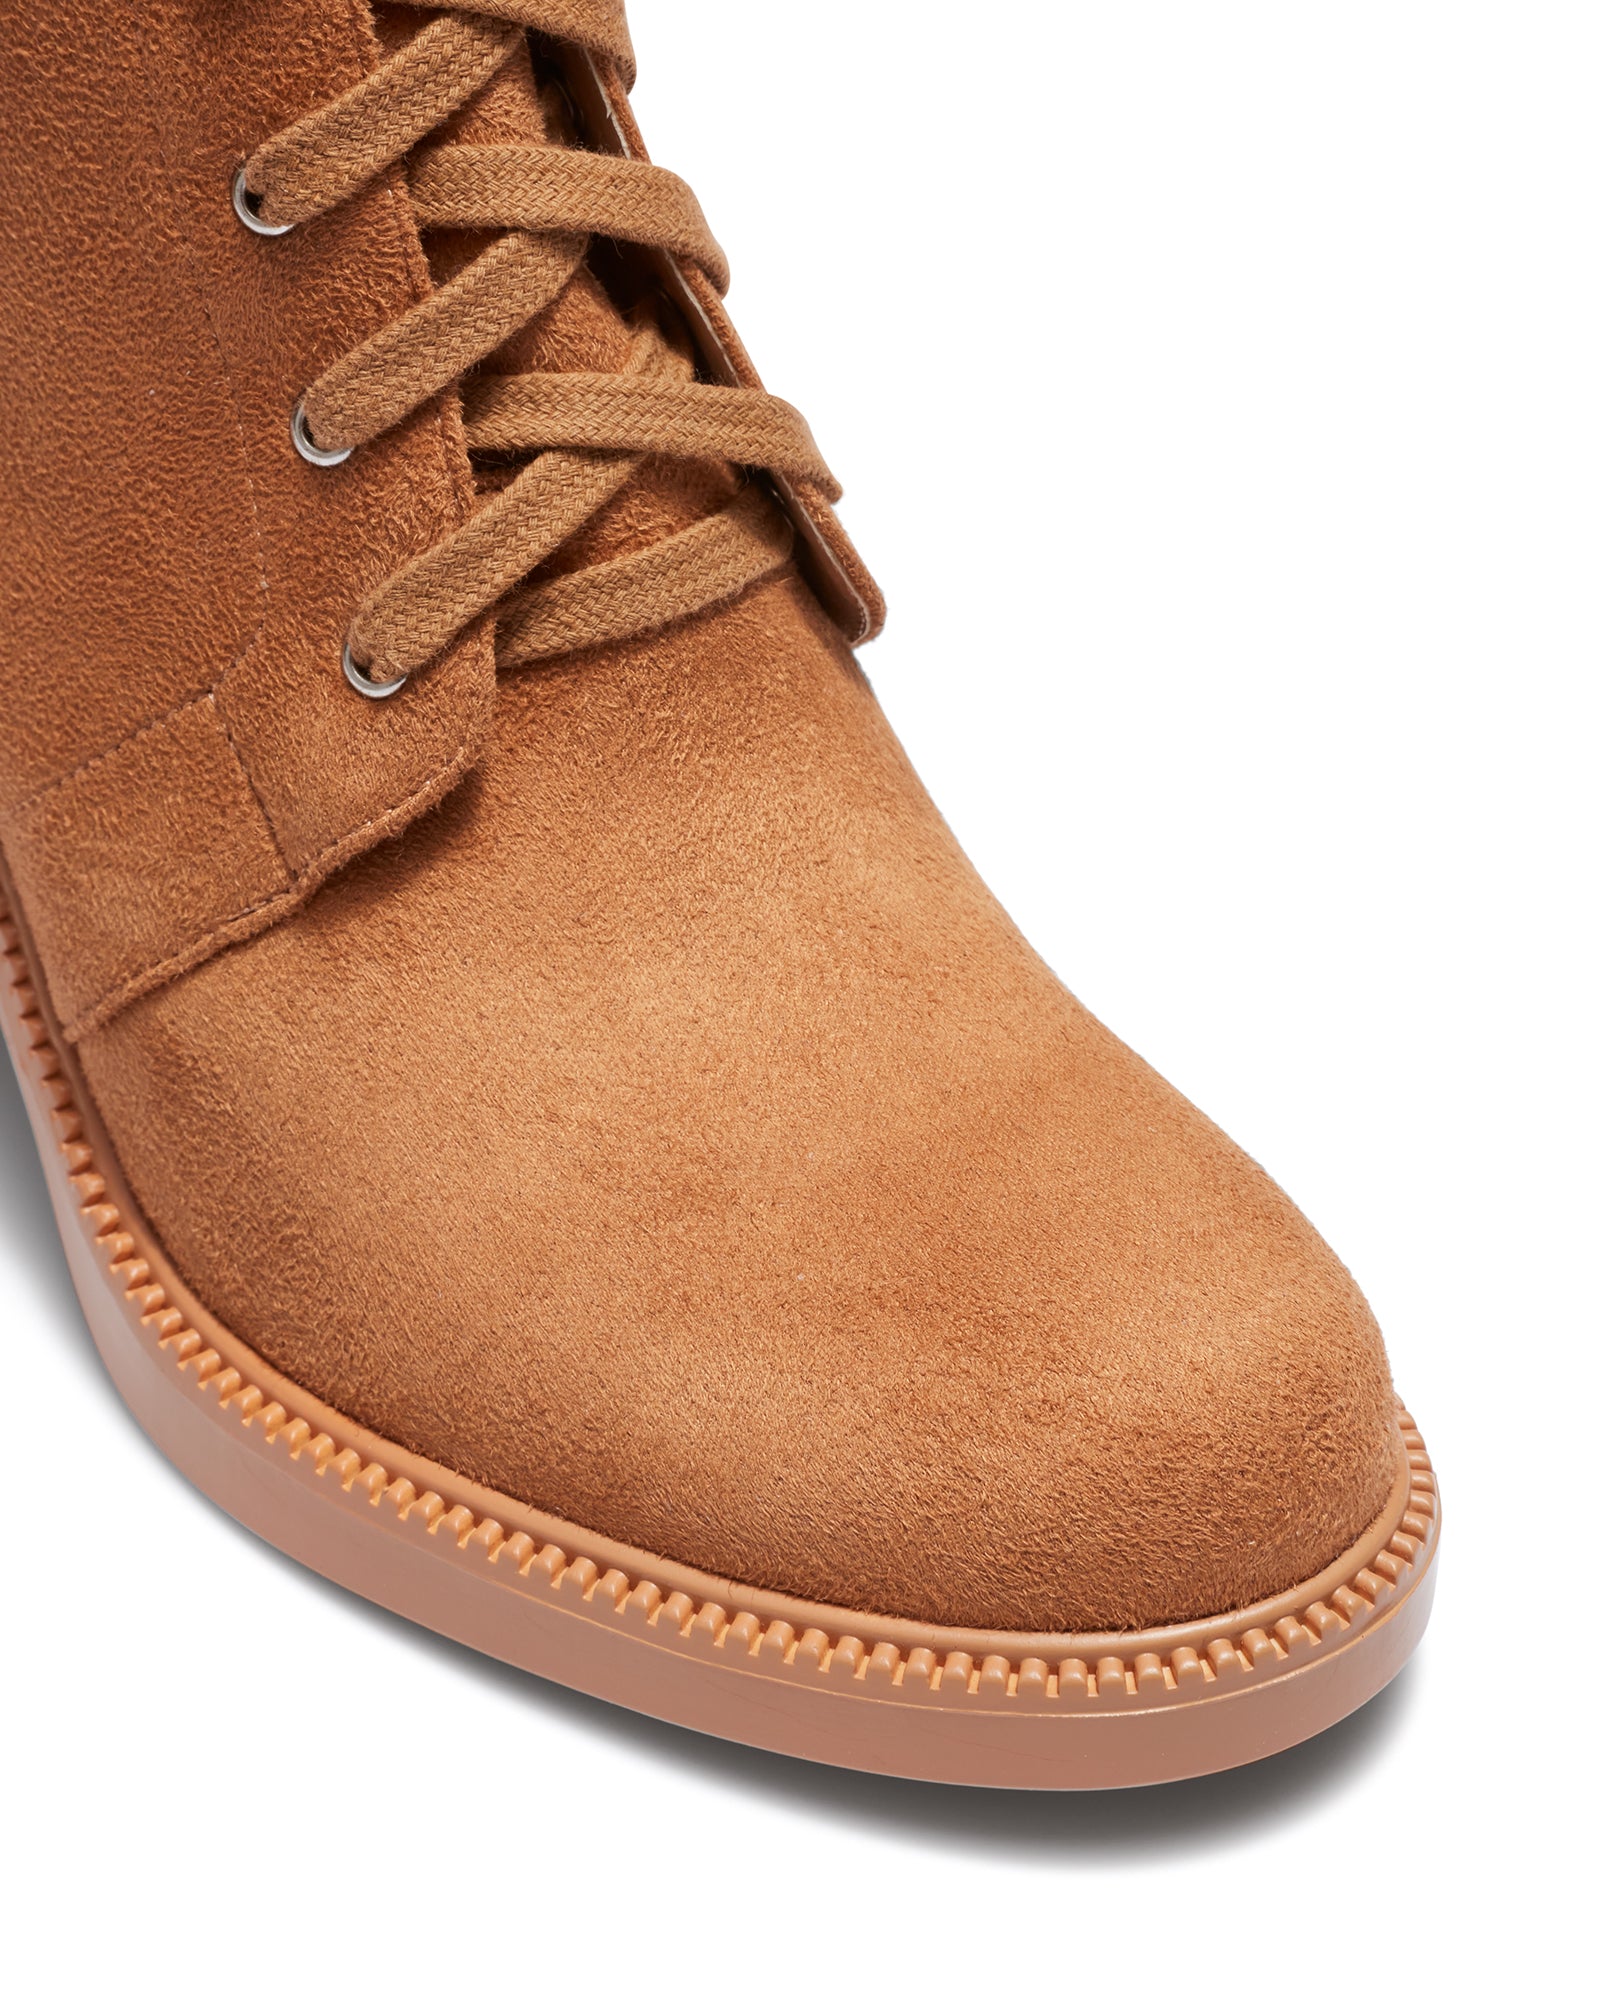 Therapy Shoes Sloane Camel | Women's Boots | Lace Up | Ankle | Chunky